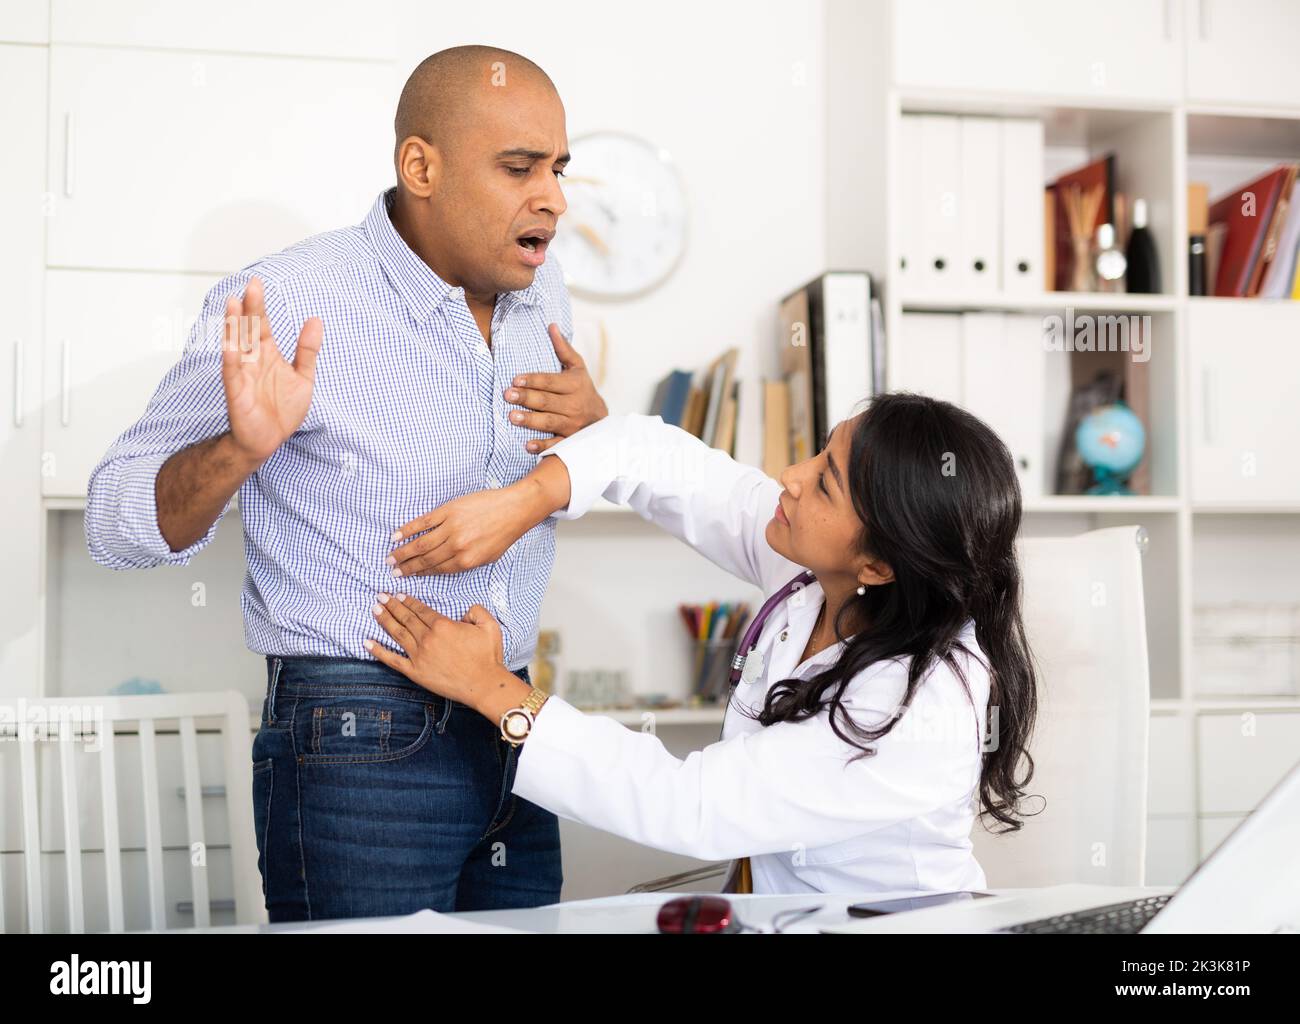 Patient in examination by doctor in clinic Stock Photo